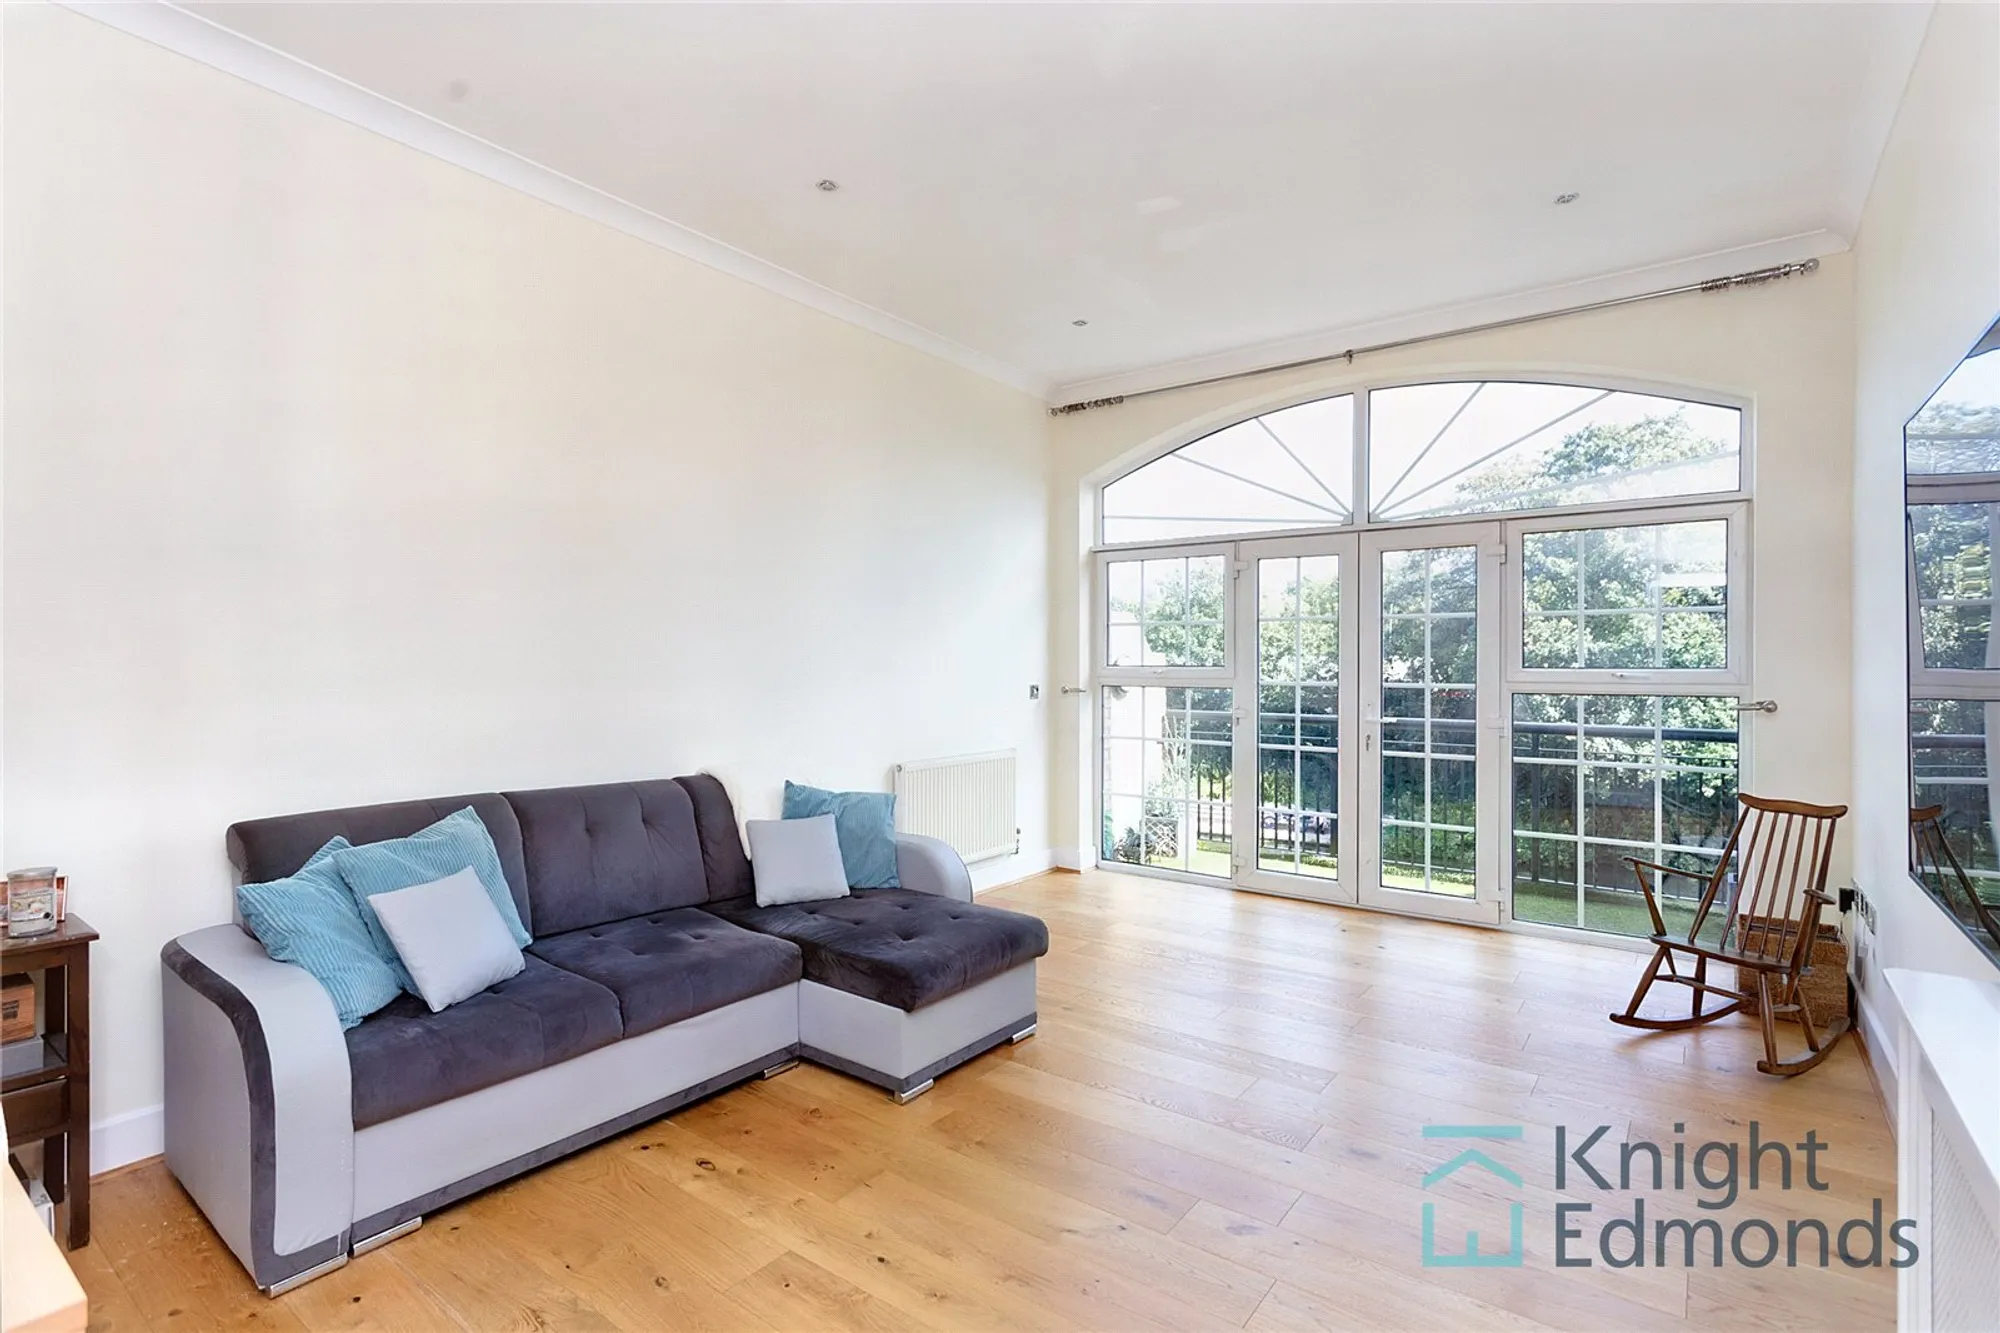 3 bed terraced house for sale in St. Peters Street, Maidstone, ME16